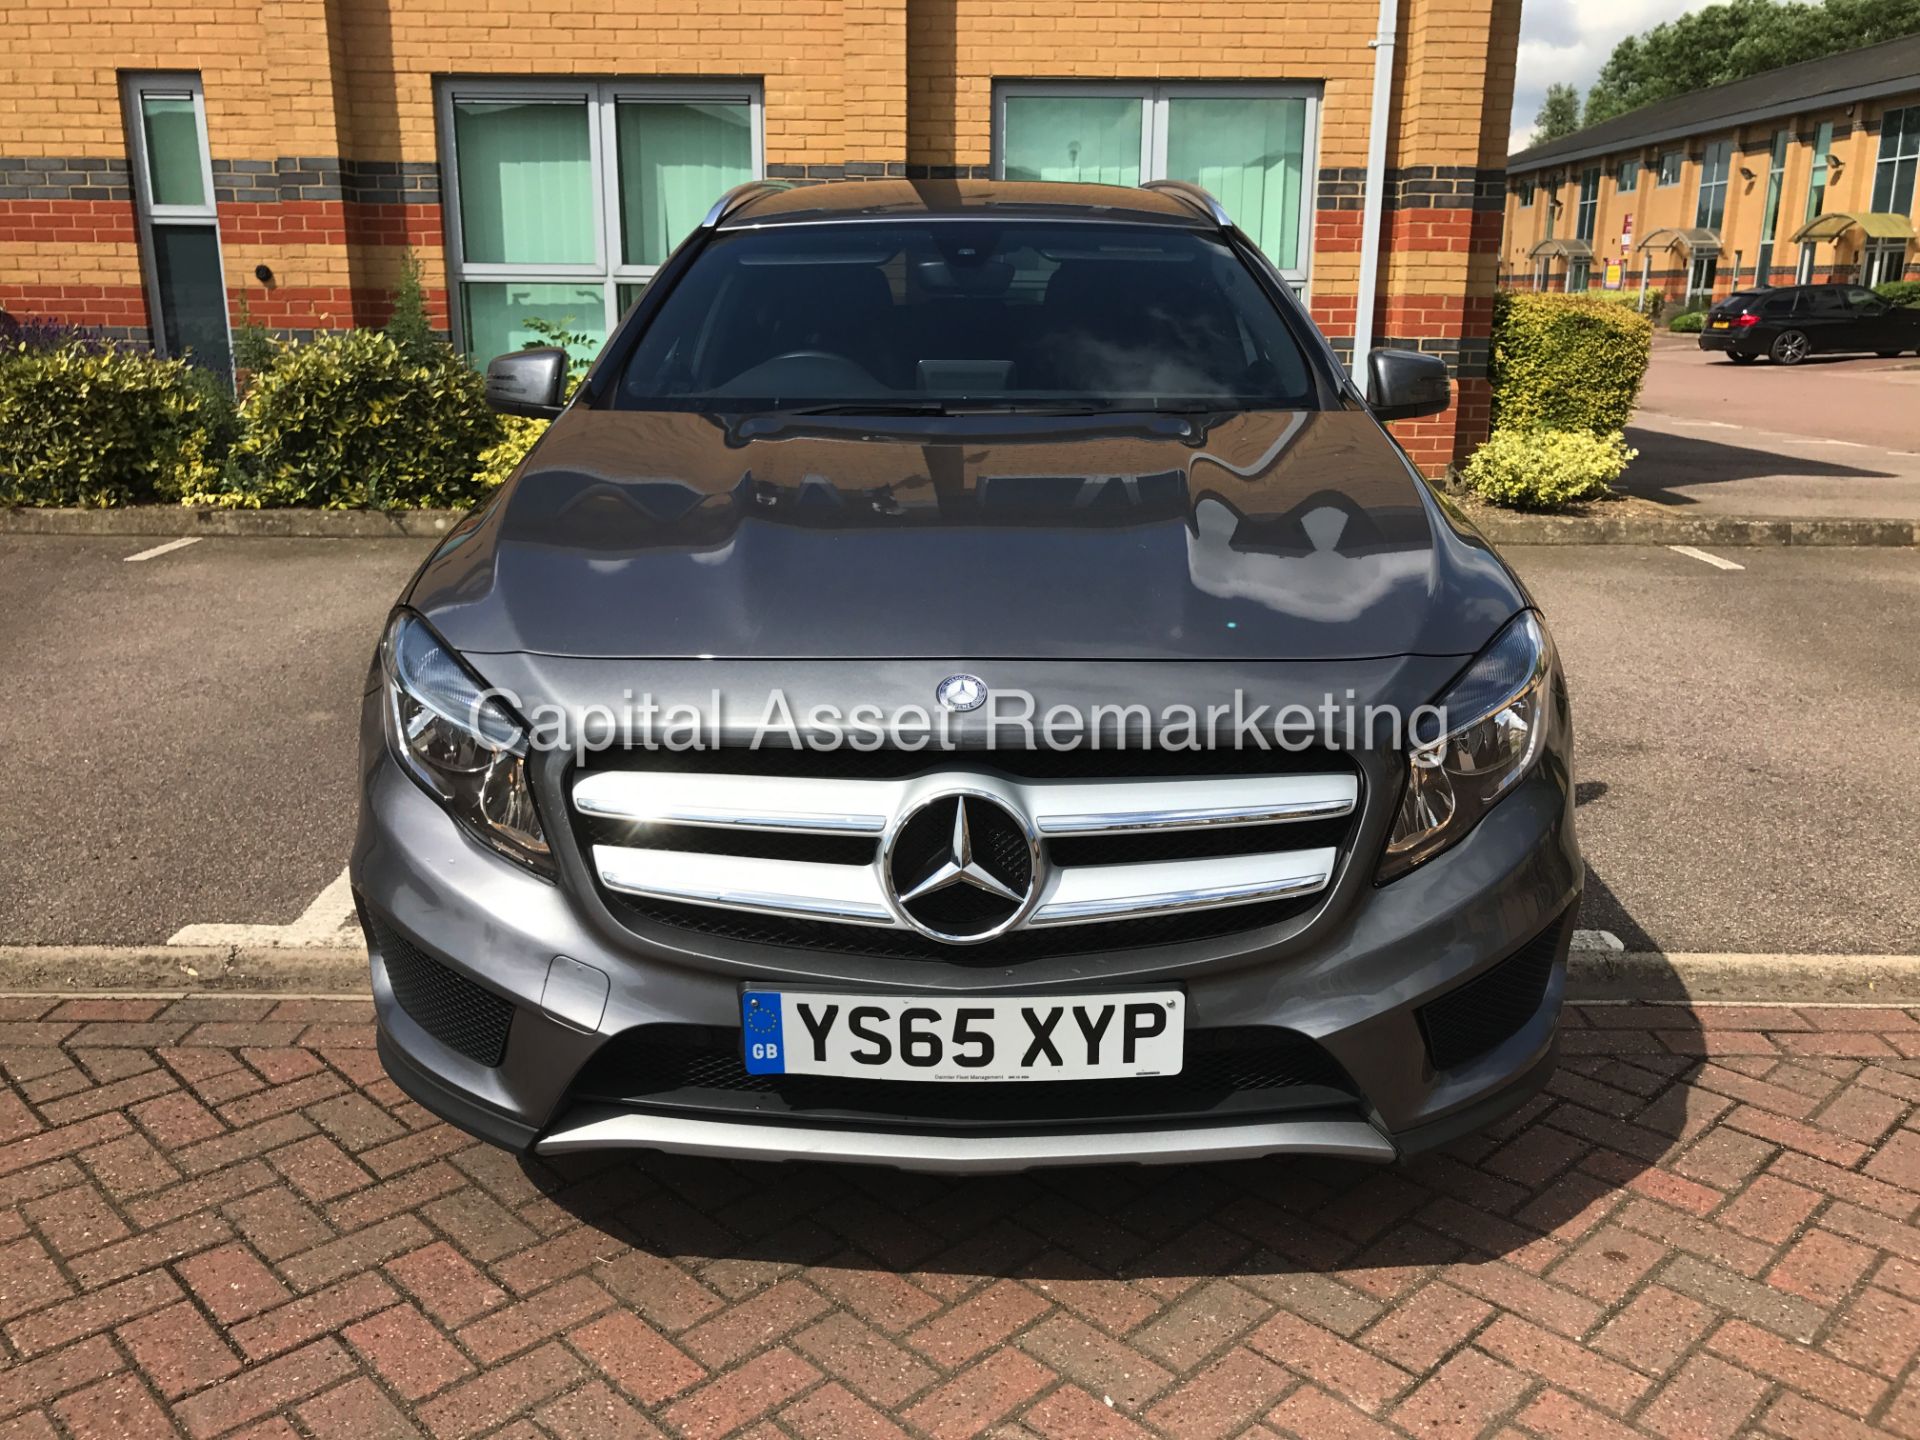 (On Sale) MERCEDES - BENZ GLA 220d "AMG LINE" 4 MATIC - 7G TRONIC AUTO - (2016 MODEL) 1 OWNER - Image 3 of 25